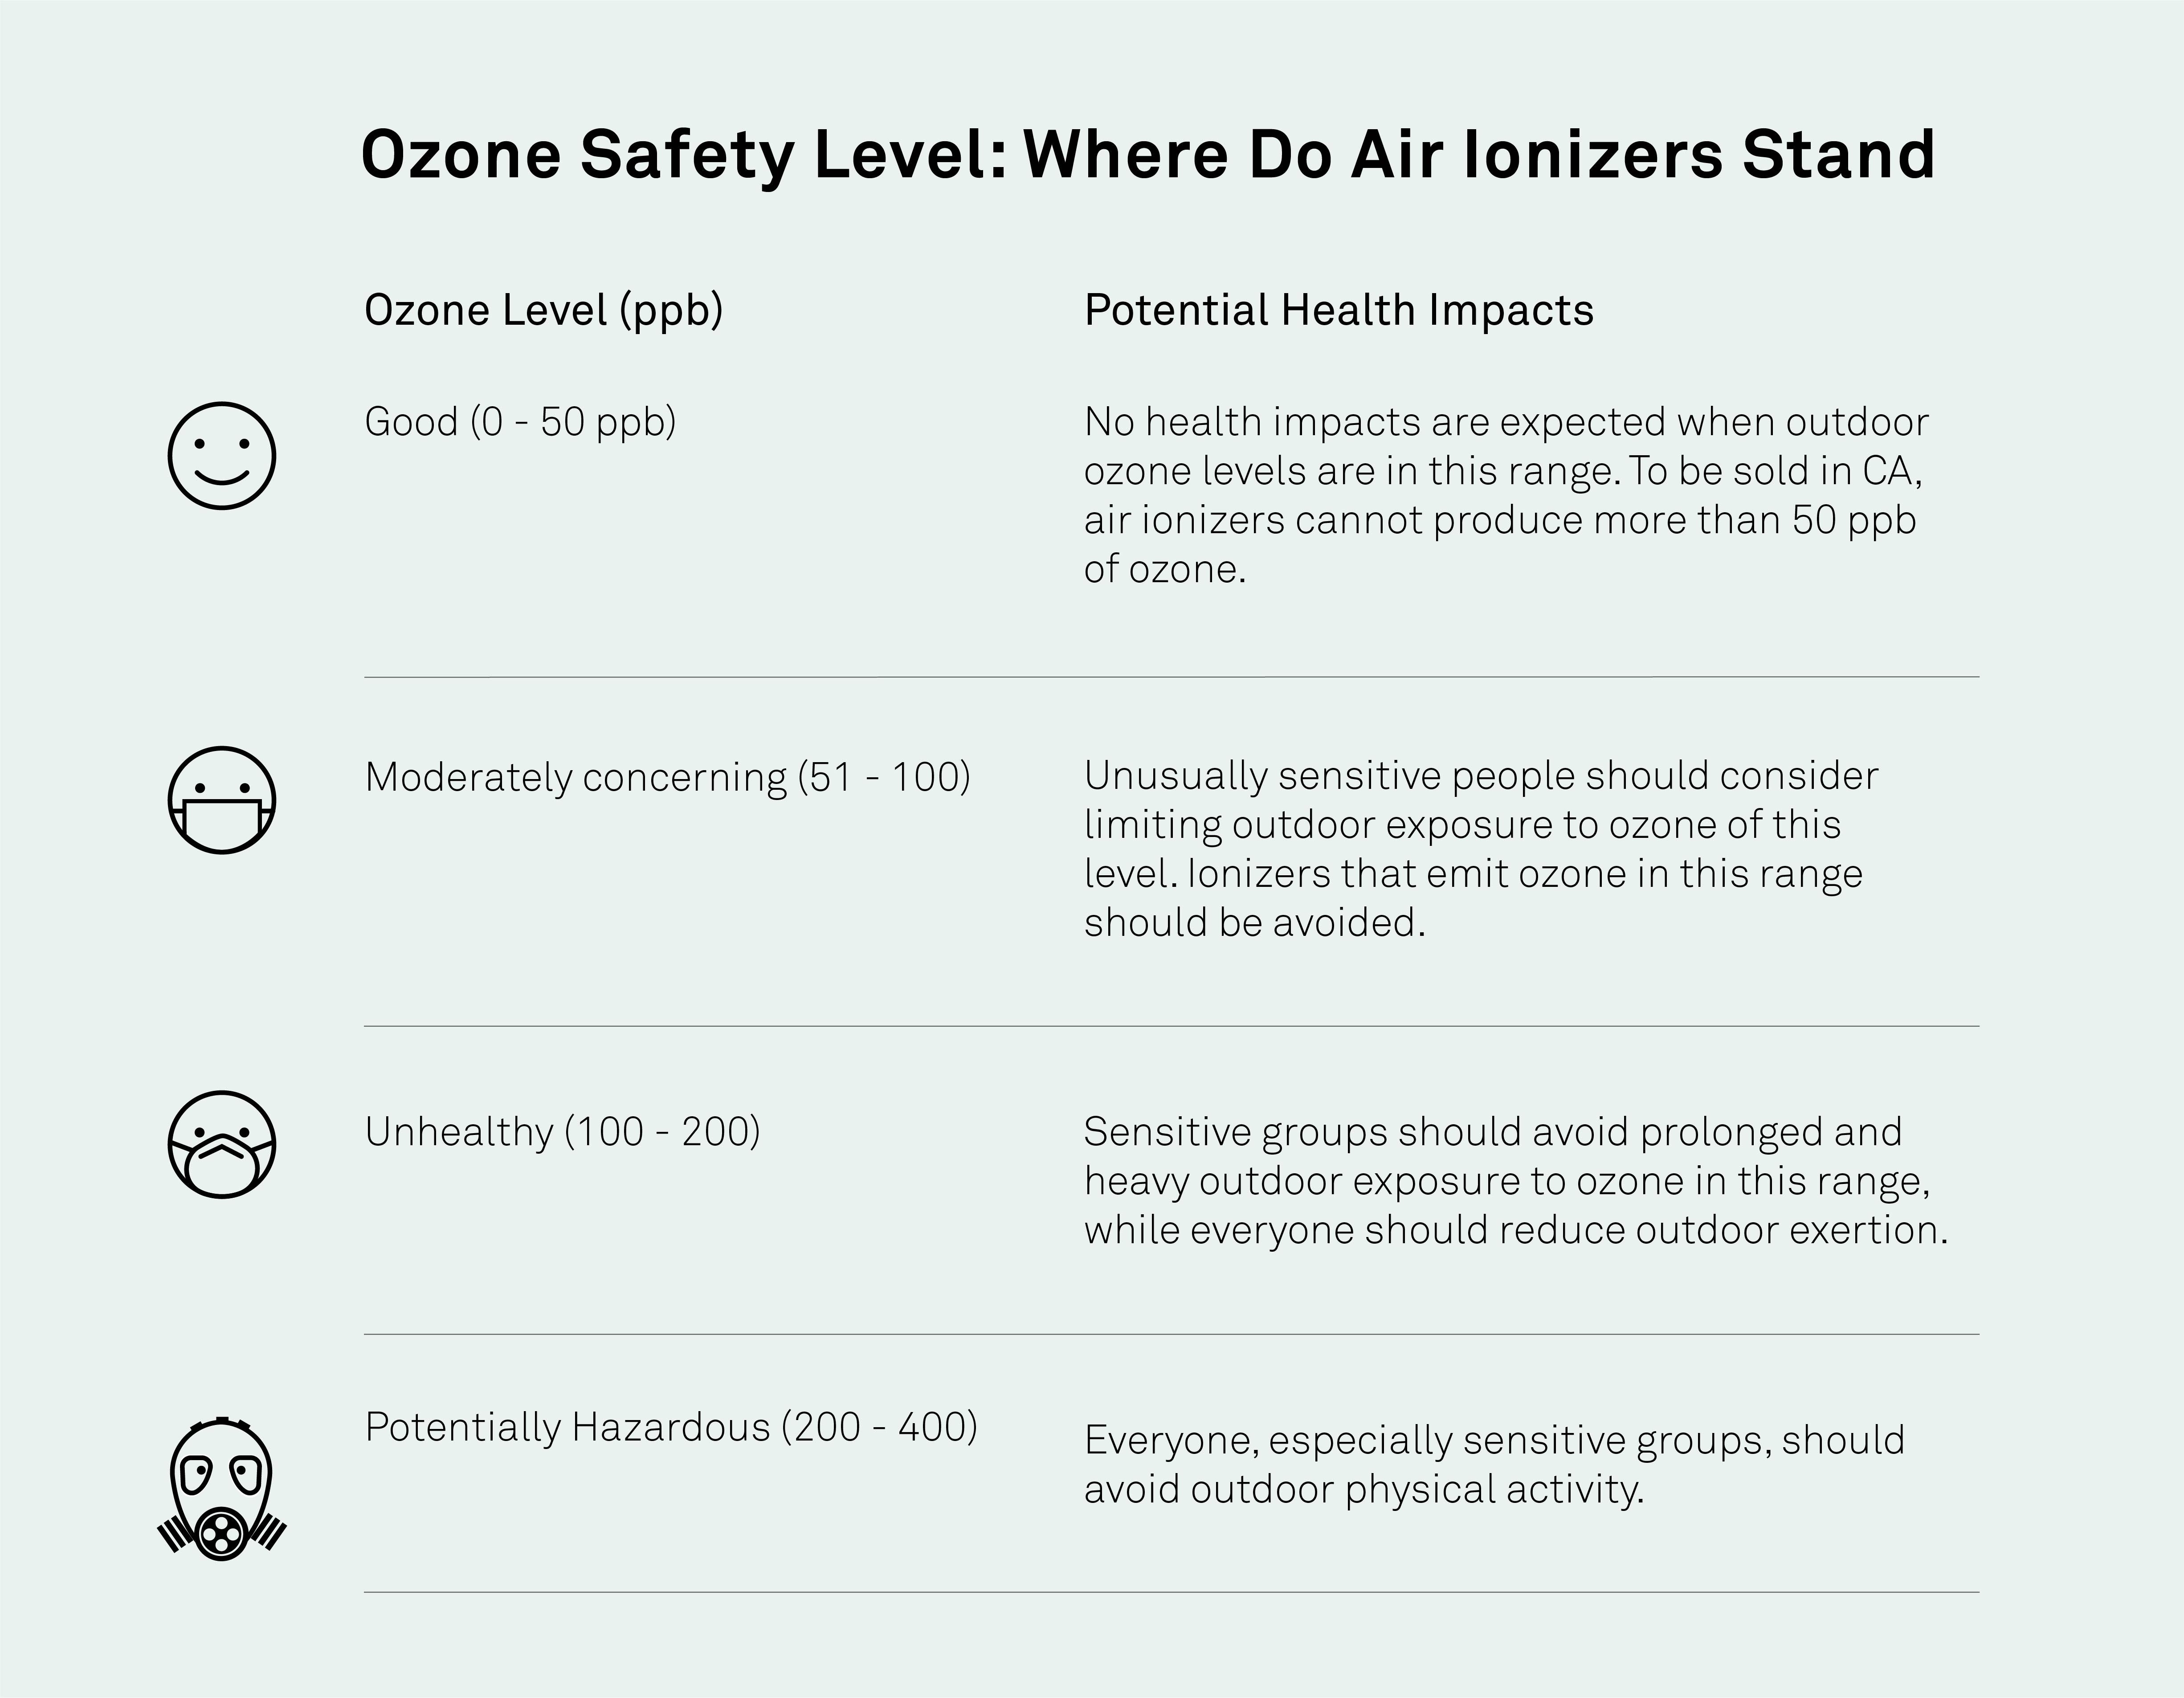 Air ionizer dangers: Ozone levels and corresponding health impacts